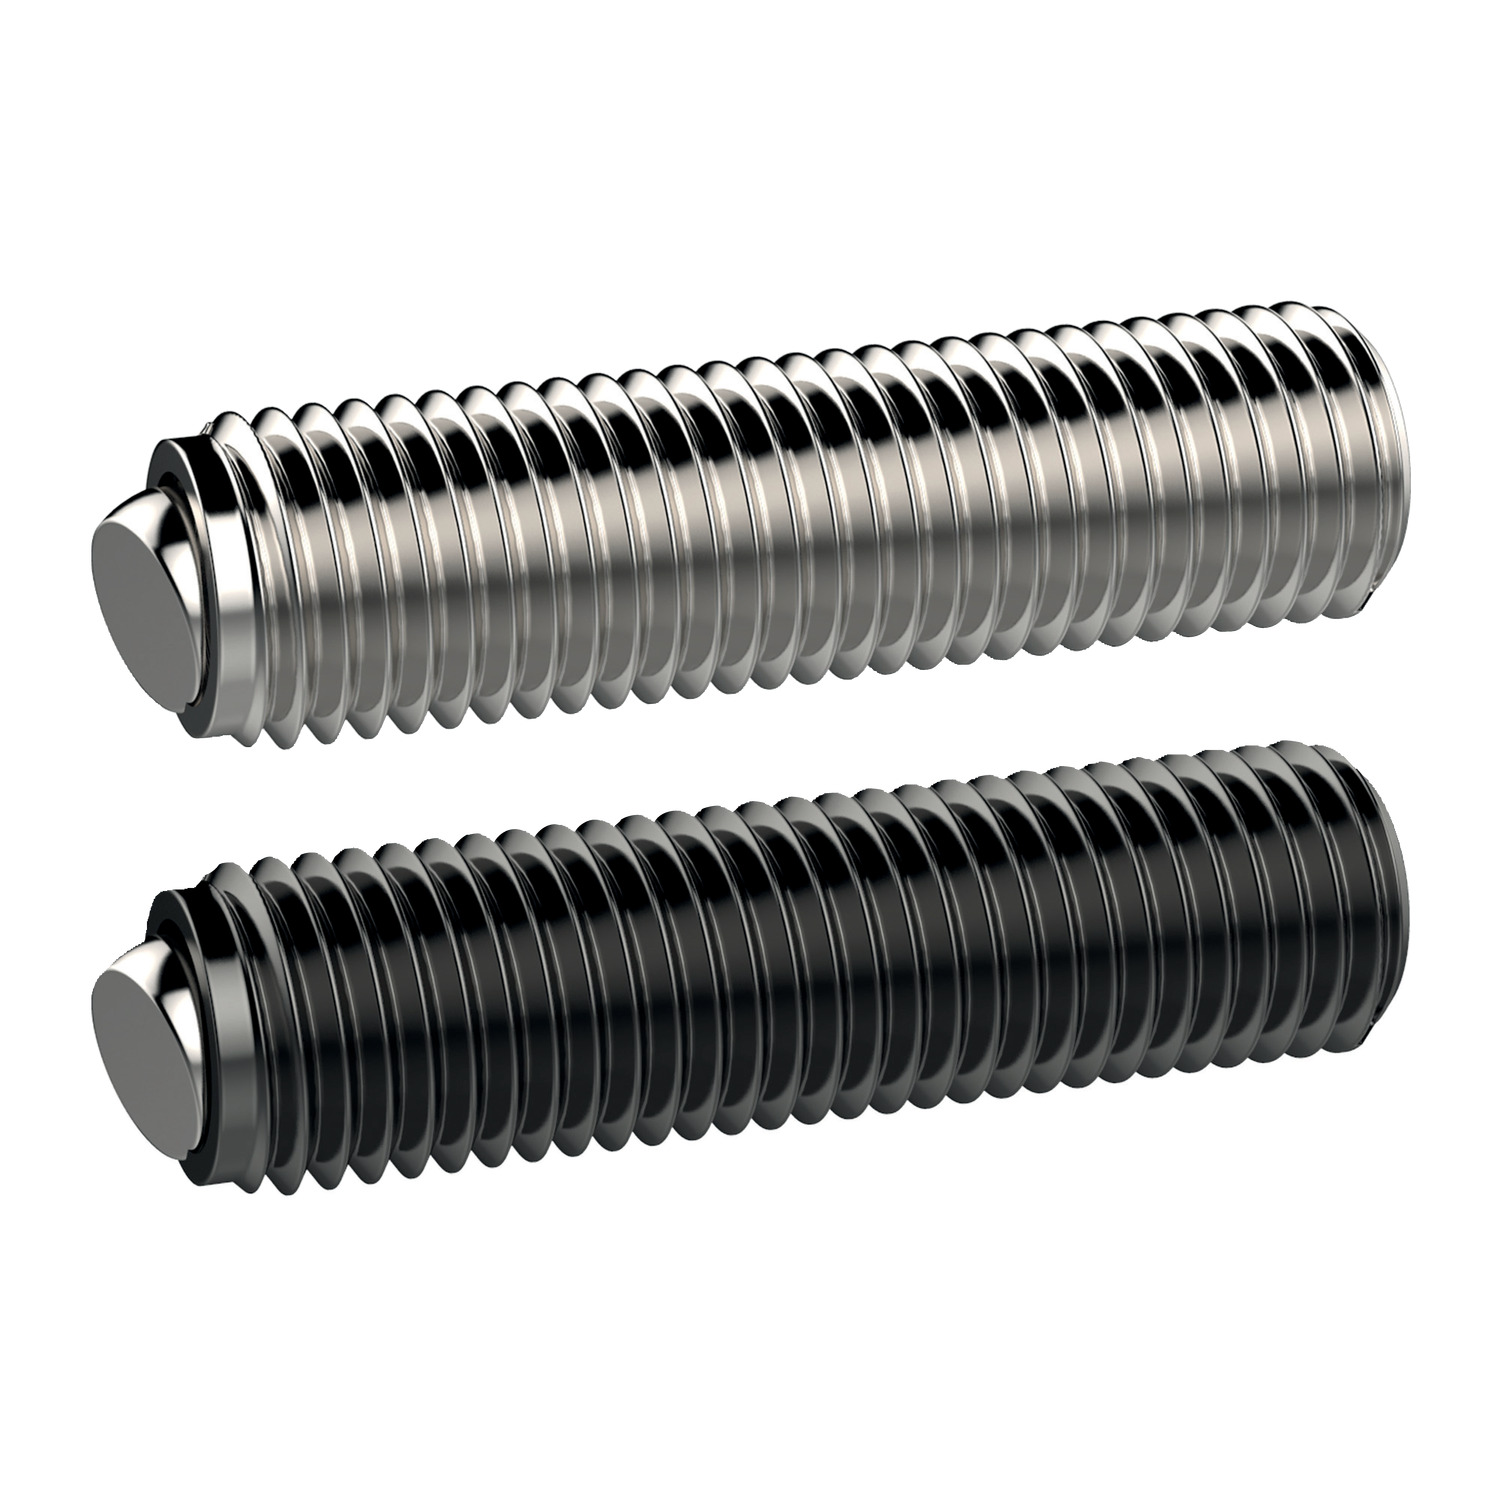 Thrust Screws - Ball Ended These ball ended thrust screws have a fine thread for precise adjustment and is ideal supporting work pieces.